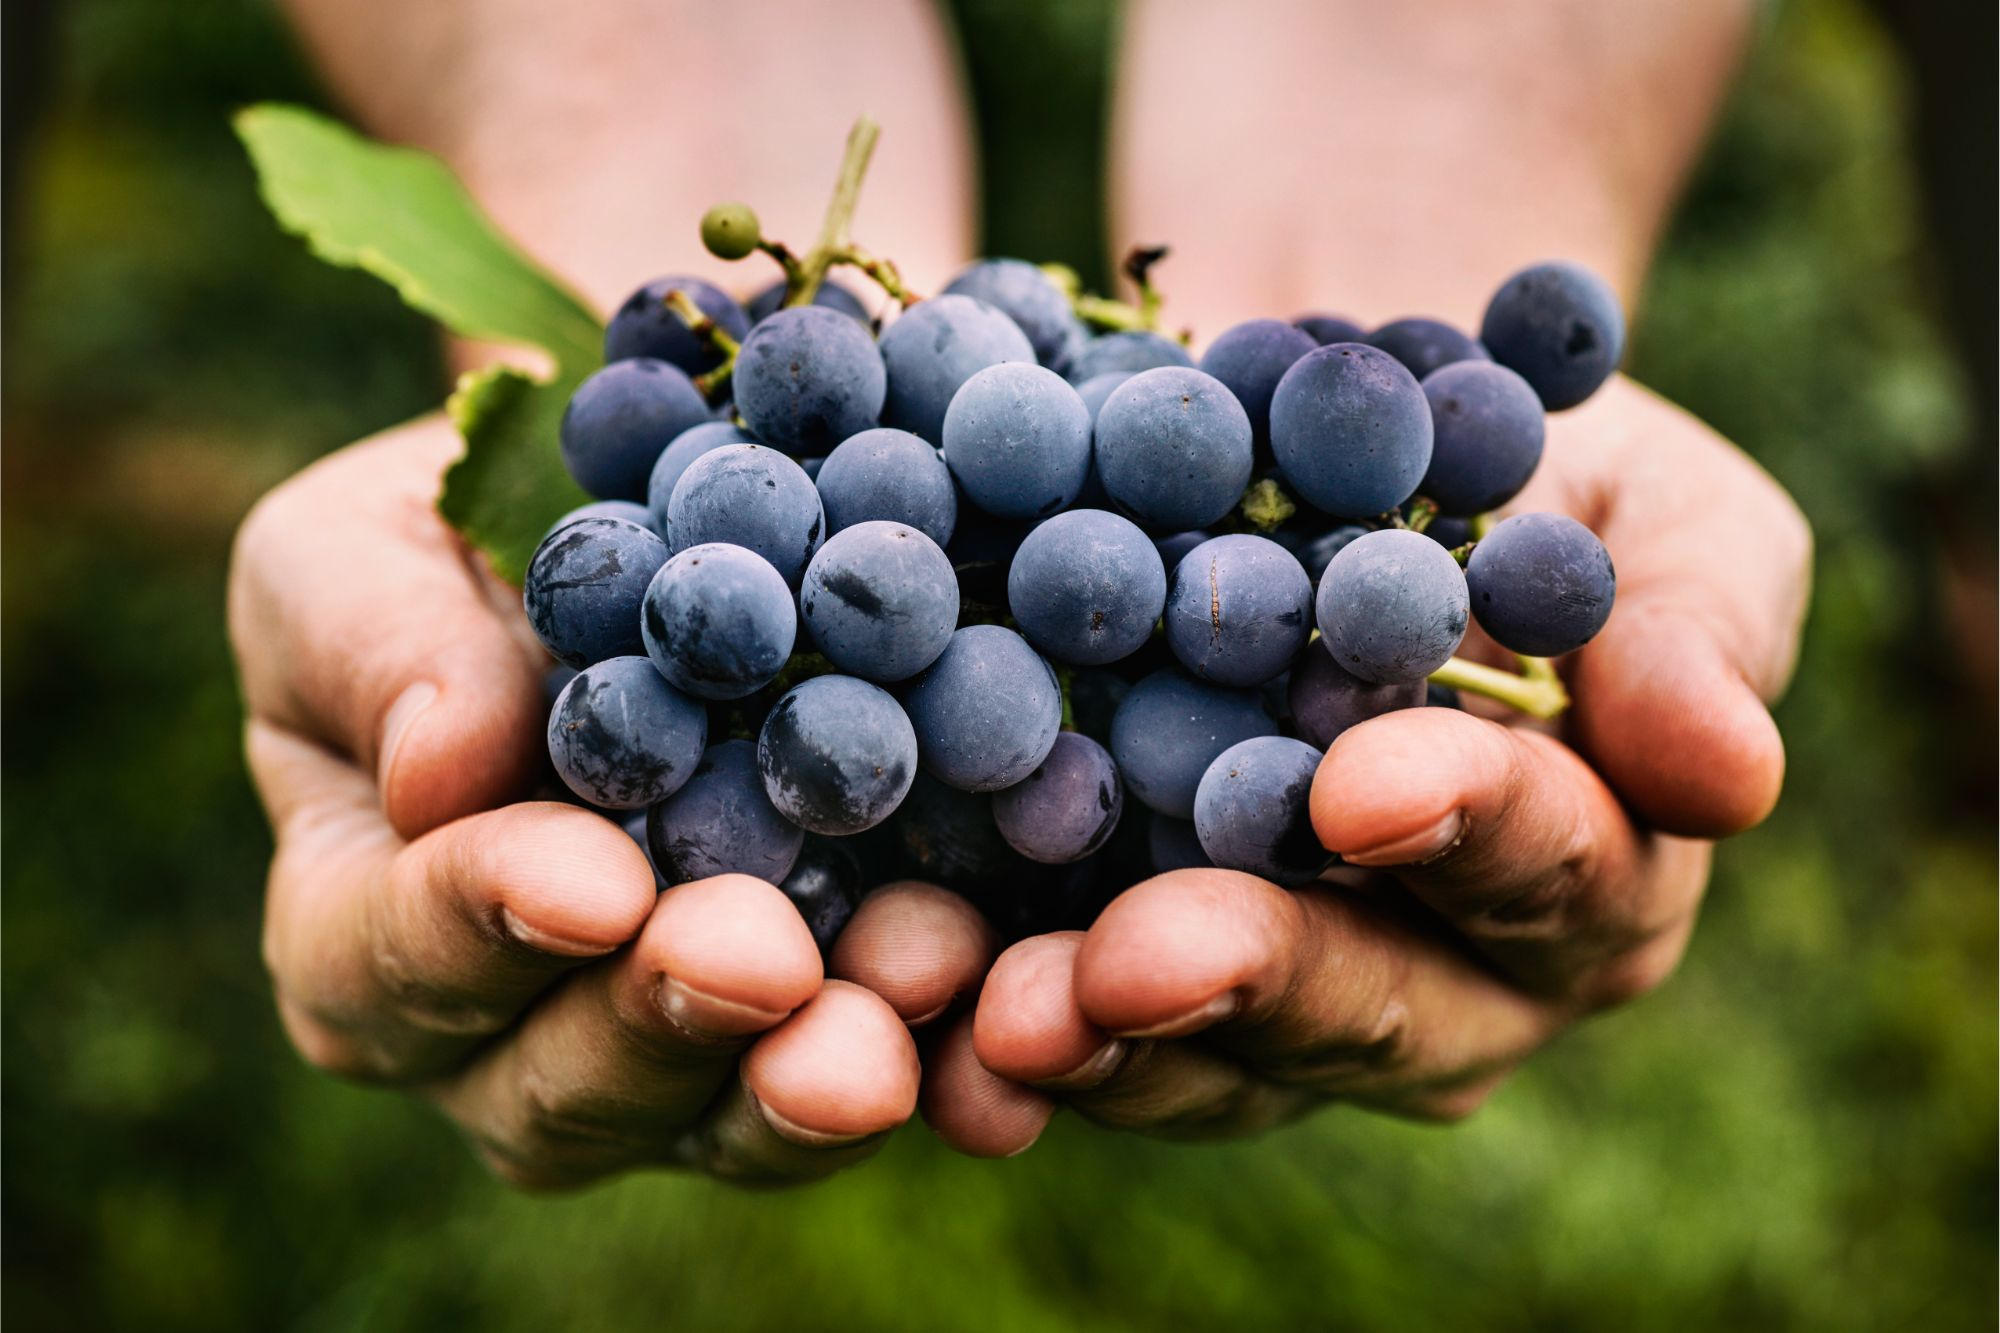 Eating grapes can protect the skin from UV radiation